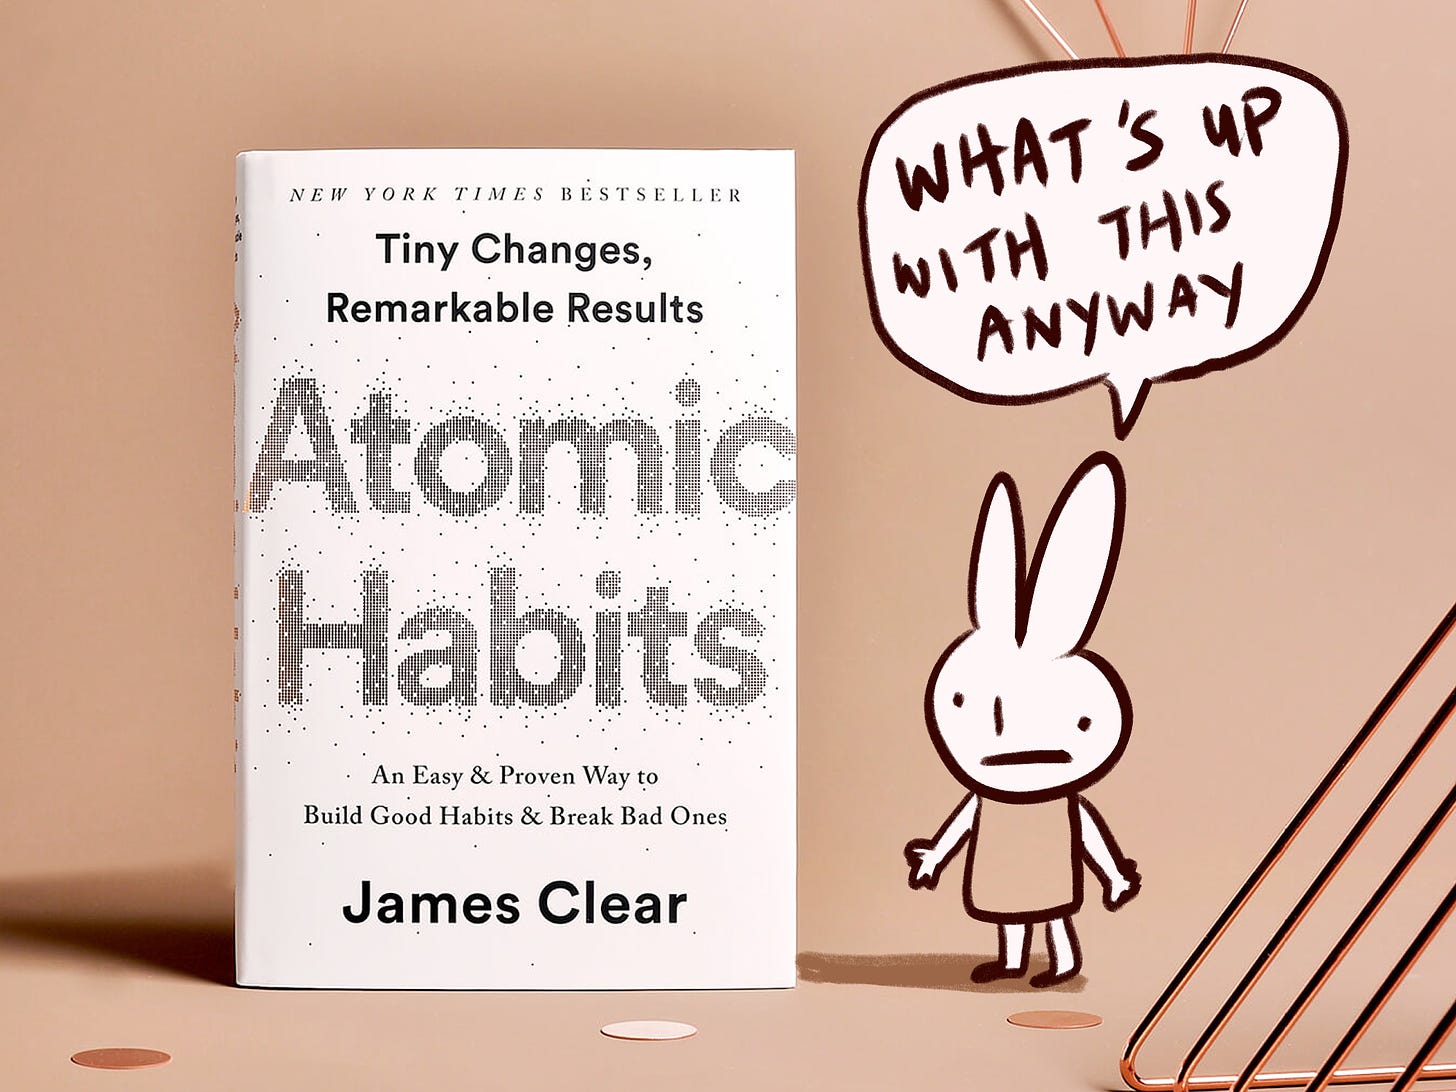 rabbit looks at atomic habits book and says what's up with this anyway